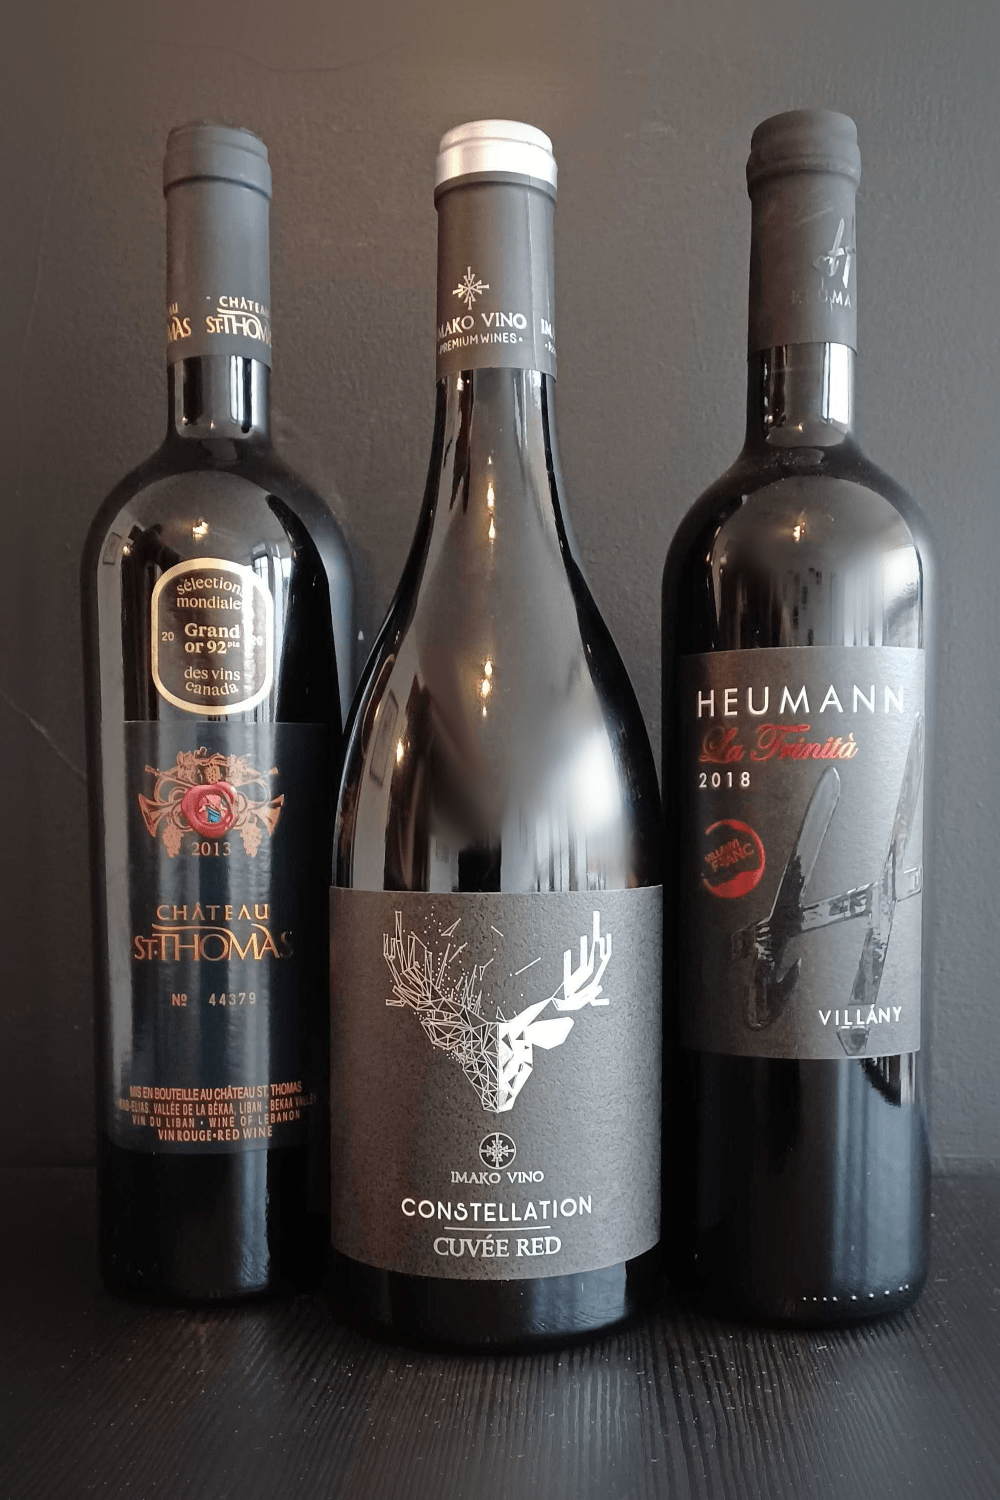 Novel Wines Mixed Case NEW - Limited Edition Premium Red Wine Case - Three Bottle Mixed Case Offer